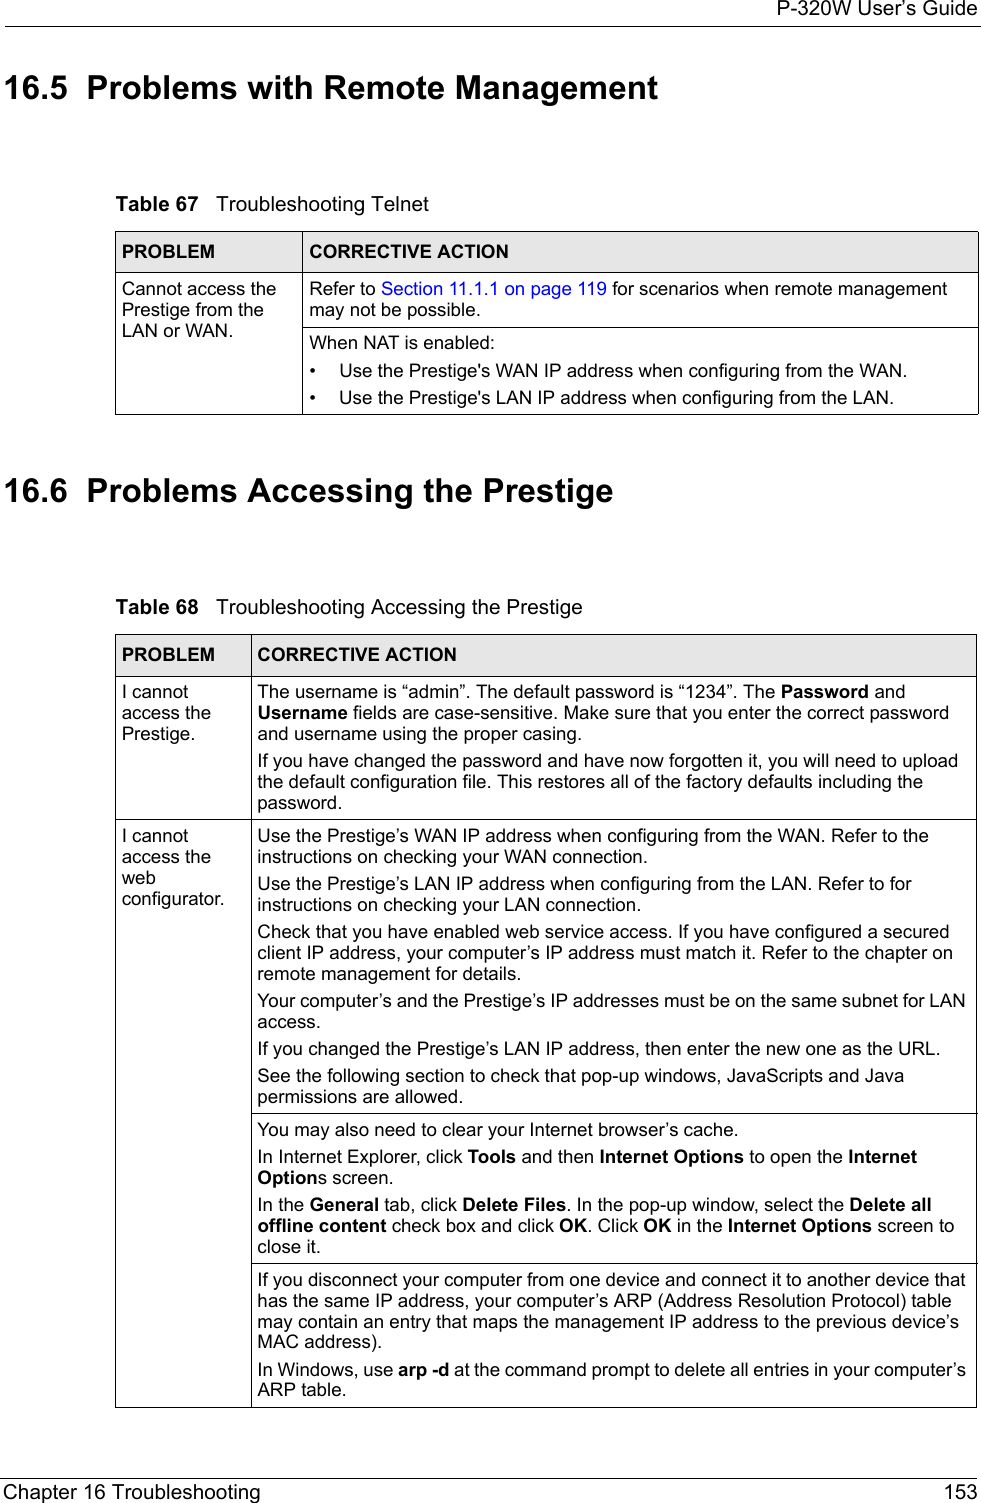 P-320W User’s GuideChapter 16 Troubleshooting 15316.5  Problems with Remote ManagementTable 67   Troubleshooting TelnetPROBLEM CORRECTIVE ACTIONCannot access the Prestige from the LAN or WAN.Refer to Section 11.1.1 on page 119 for scenarios when remote management may not be possible. When NAT is enabled:• Use the Prestige&apos;s WAN IP address when configuring from the WAN. • Use the Prestige&apos;s LAN IP address when configuring from the LAN.16.6  Problems Accessing the PrestigeTable 68   Troubleshooting Accessing the PrestigePROBLEM CORRECTIVE ACTIONI cannot access the Prestige.The username is “admin”. The default password is “1234”. The Password and Username fields are case-sensitive. Make sure that you enter the correct password and username using the proper casing.If you have changed the password and have now forgotten it, you will need to upload the default configuration file. This restores all of the factory defaults including the password.I cannot access the web configurator.Use the Prestige’s WAN IP address when configuring from the WAN. Refer to the instructions on checking your WAN connection.Use the Prestige’s LAN IP address when configuring from the LAN. Refer to for instructions on checking your LAN connection.Check that you have enabled web service access. If you have configured a secured client IP address, your computer’s IP address must match it. Refer to the chapter on remote management for details. Your computer’s and the Prestige’s IP addresses must be on the same subnet for LAN access.If you changed the Prestige’s LAN IP address, then enter the new one as the URL.See the following section to check that pop-up windows, JavaScripts and Java permissions are allowed.You may also need to clear your Internet browser’s cache.In Internet Explorer, click Tools and then Internet Options to open the Internet Options screen. In the General tab, click Delete Files. In the pop-up window, select the Delete all offline content check box and click OK. Click OK in the Internet Options screen to close it.If you disconnect your computer from one device and connect it to another device that has the same IP address, your computer’s ARP (Address Resolution Protocol) table may contain an entry that maps the management IP address to the previous device’s MAC address). In Windows, use arp -d at the command prompt to delete all entries in your computer’s ARP table.